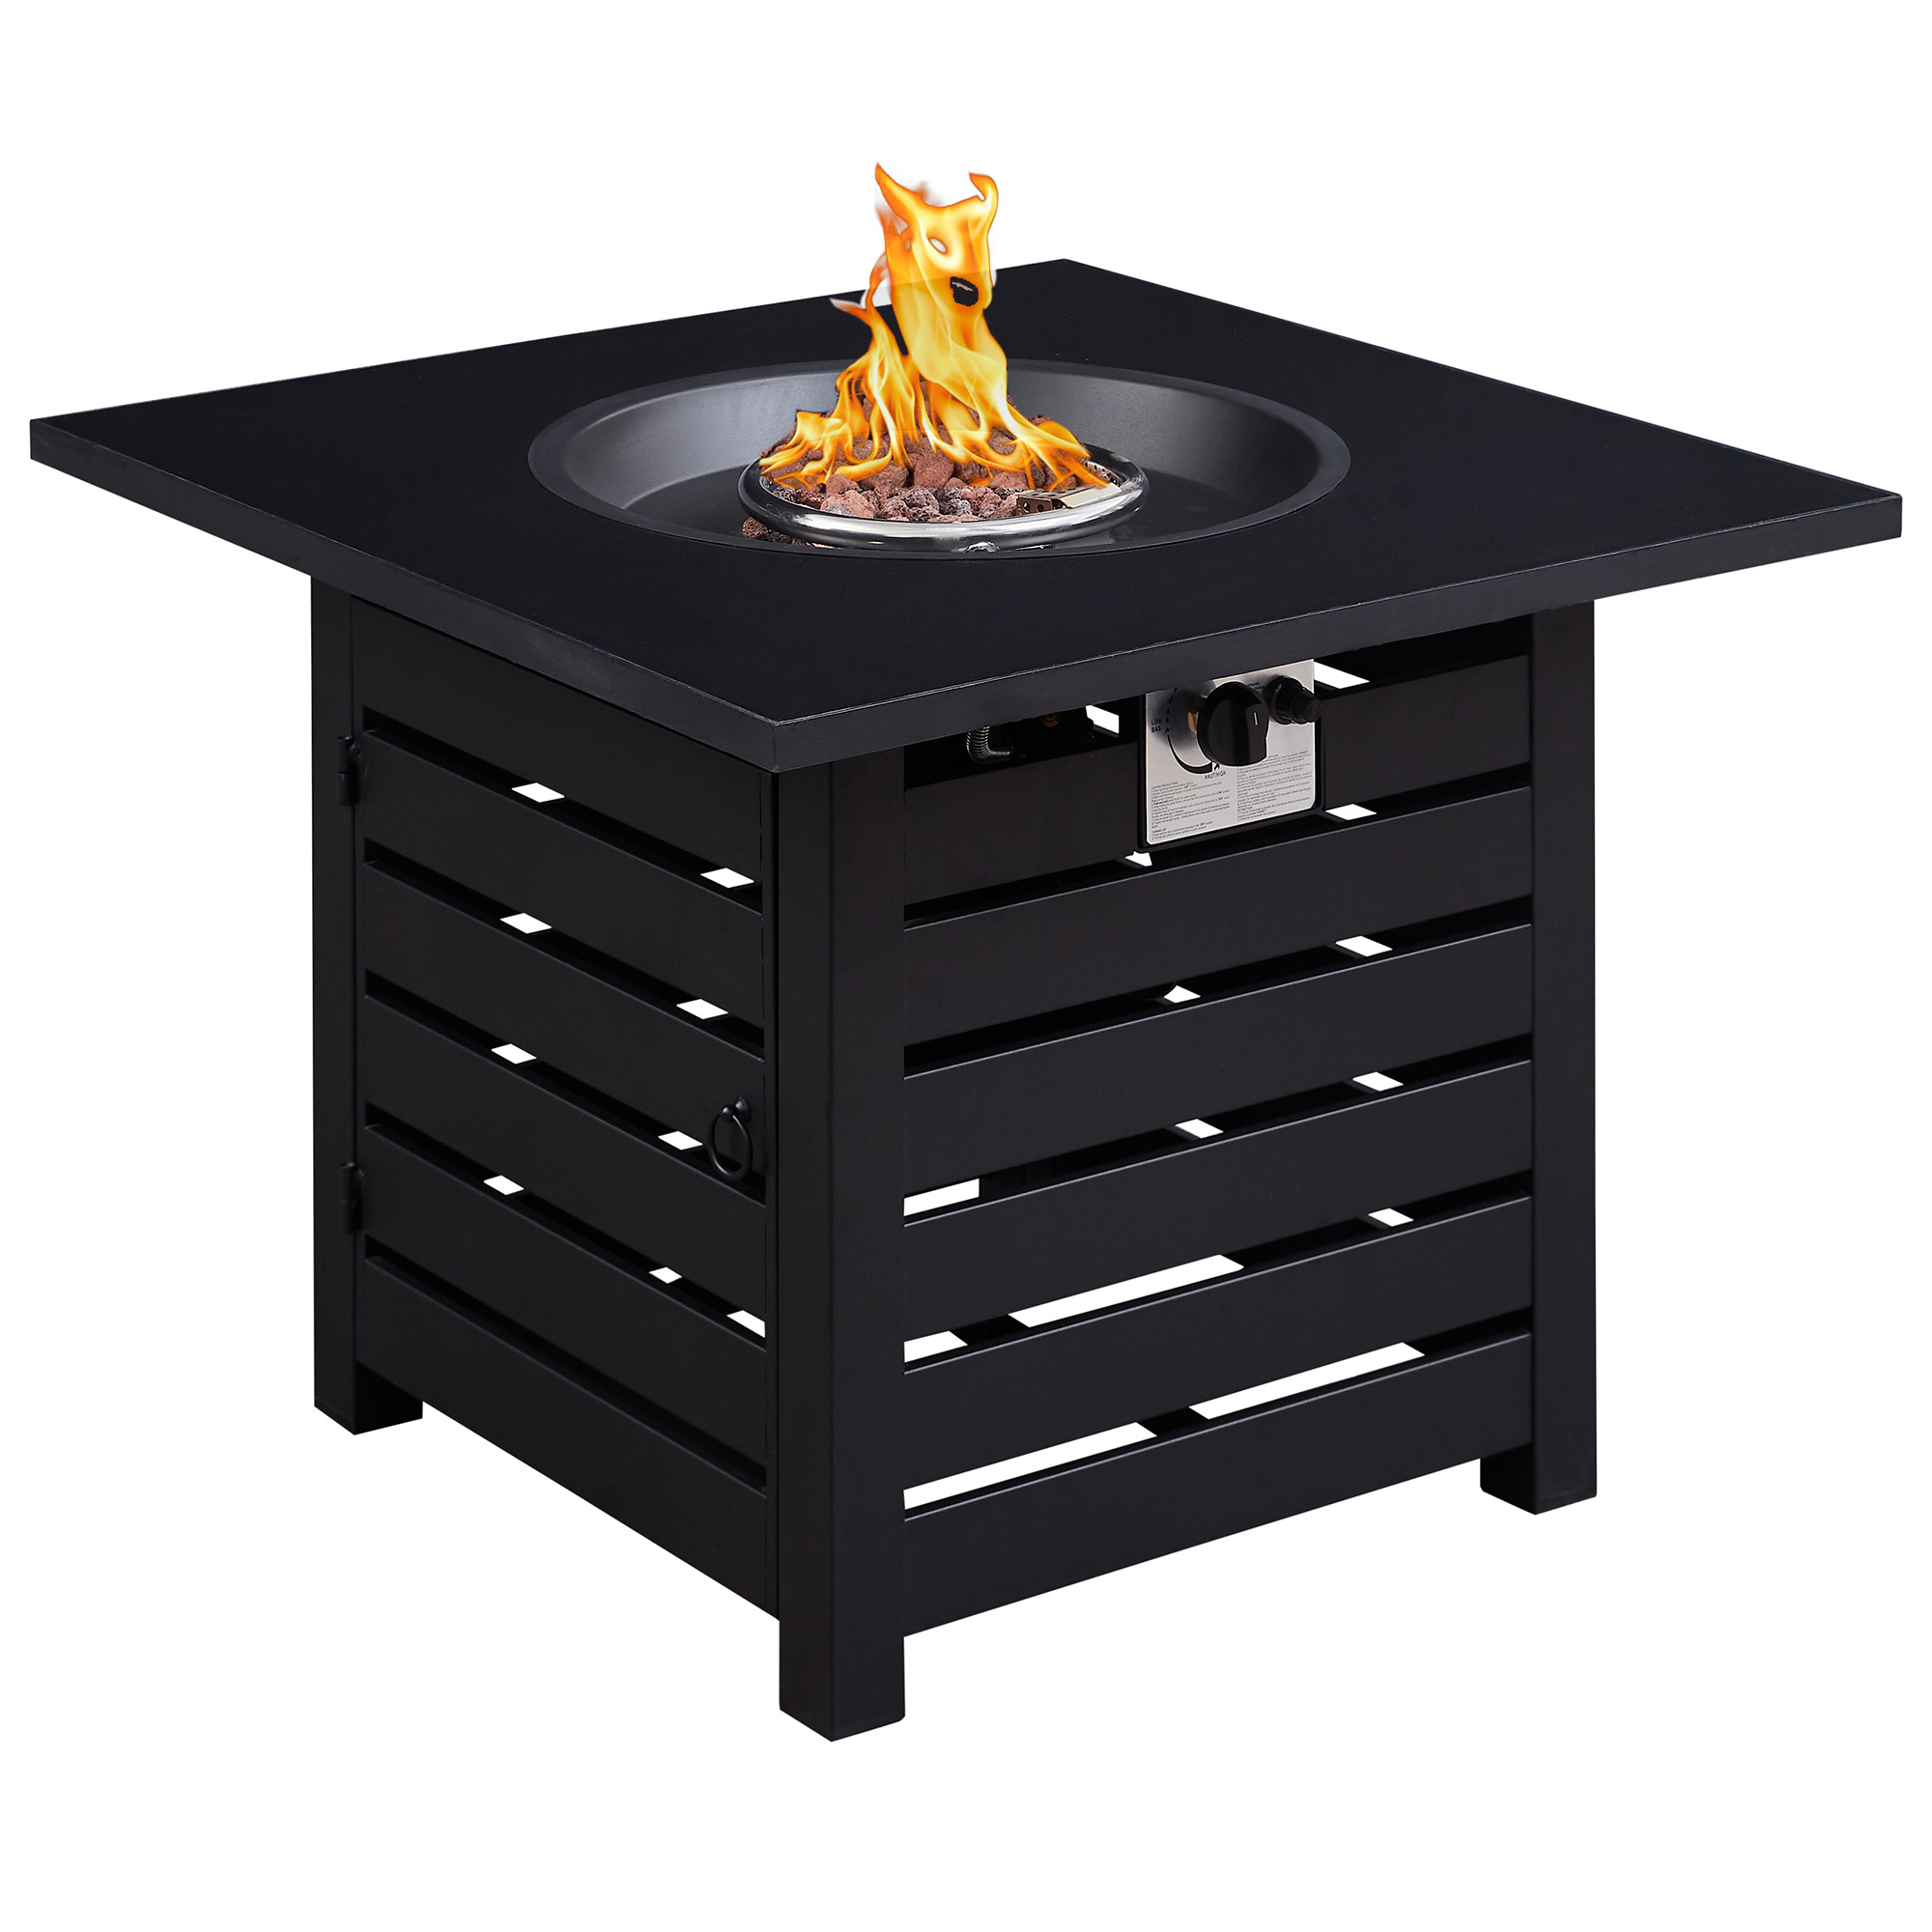 32 in. Square Ceramic Tile Top Outdoor Gas Fire Pit with Lava Rocks-Black, only for pick up